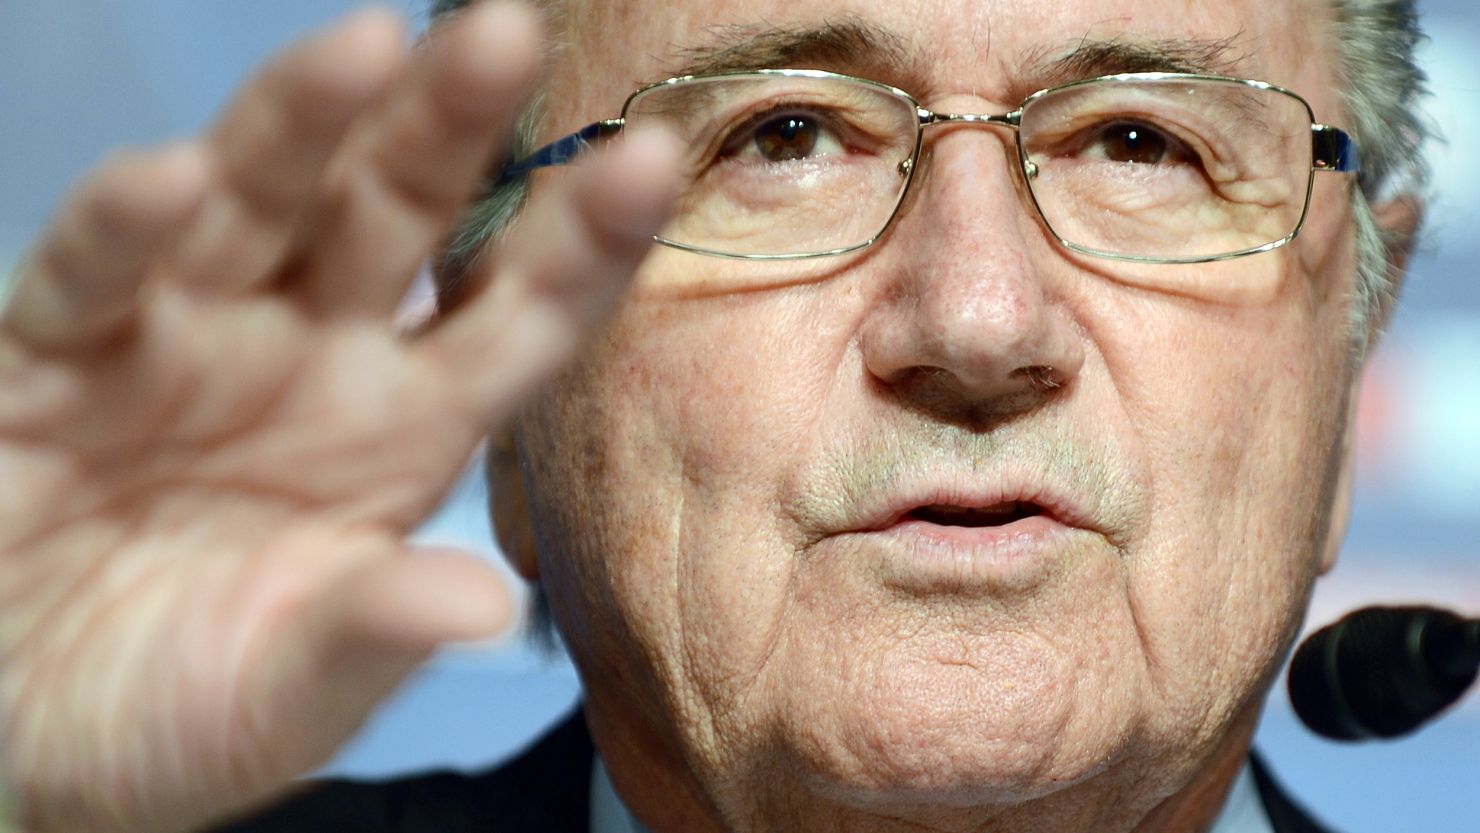  FIFA president Joseph Blatter answers questions during a press conference in Tokyo on December 15.